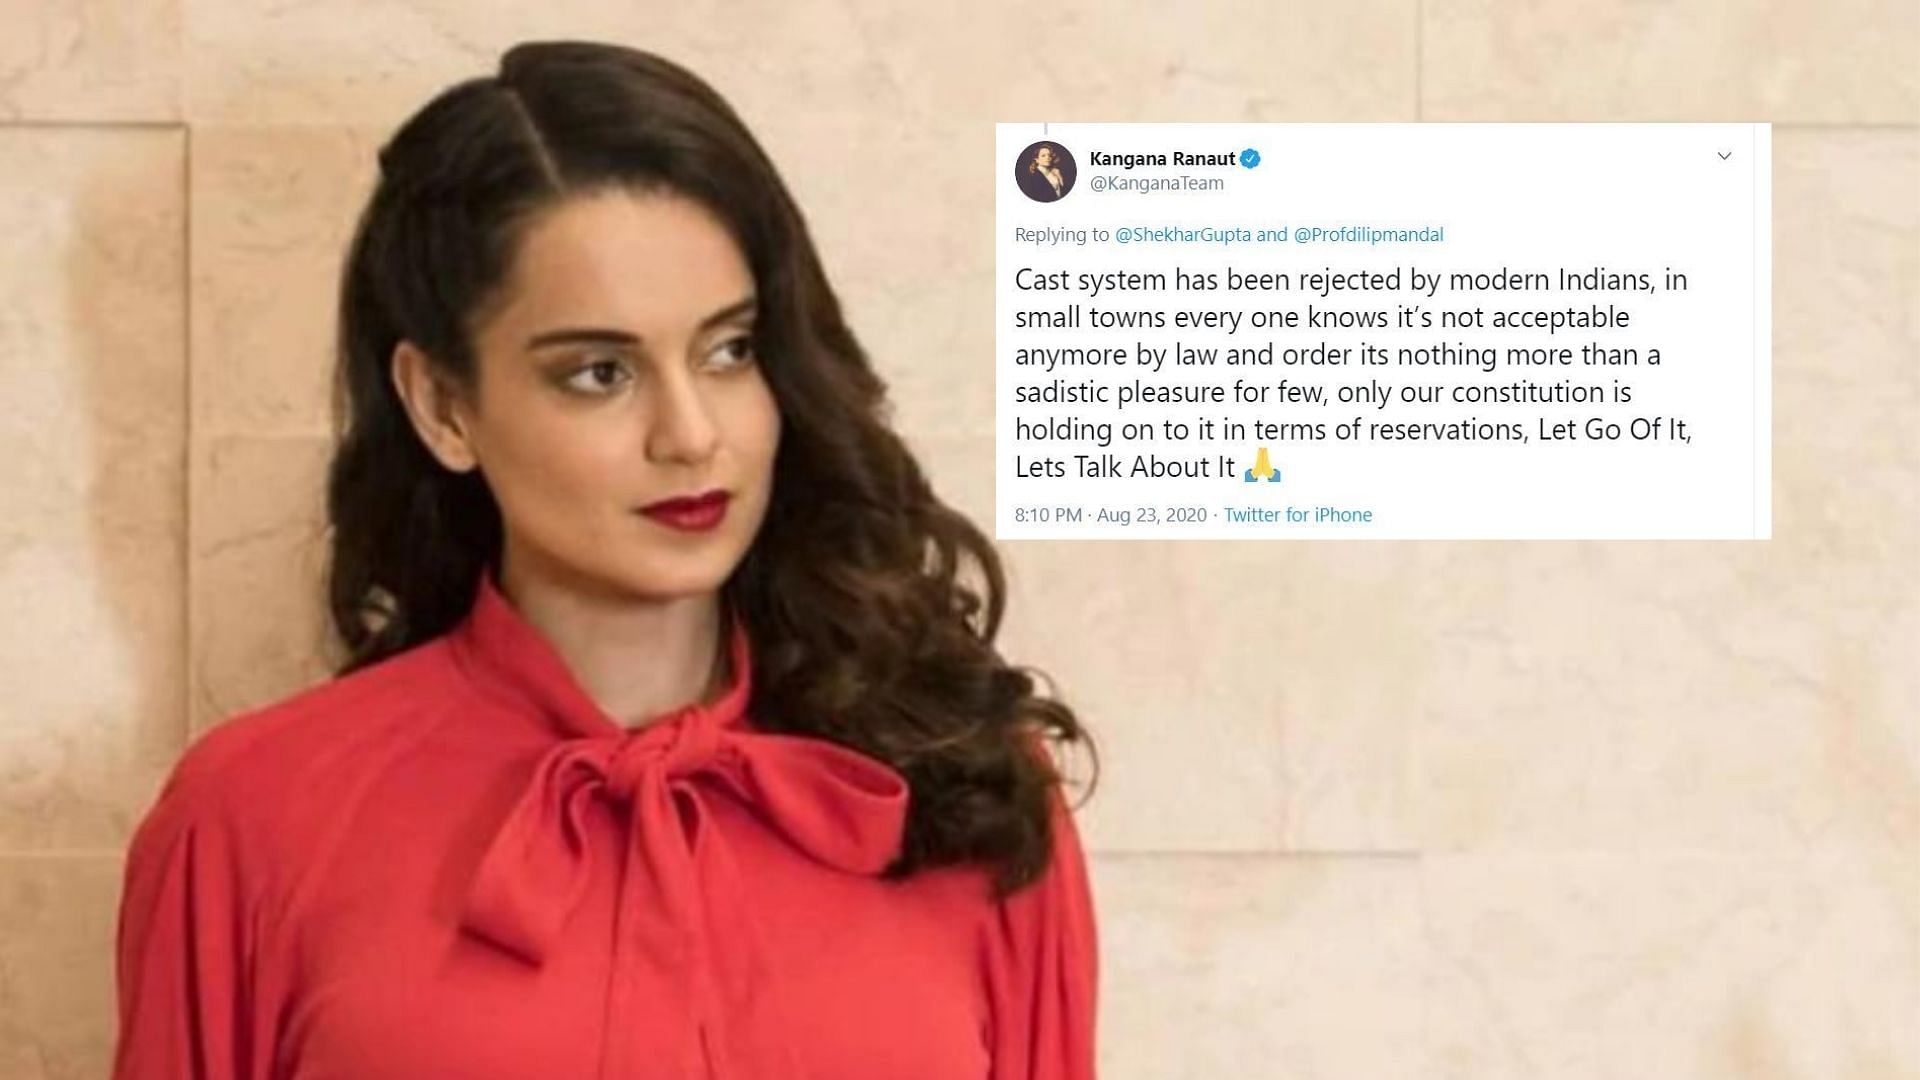 Kangana Ranaut has once again hit the headlines with her tweet - this time about caste and reservation in India.